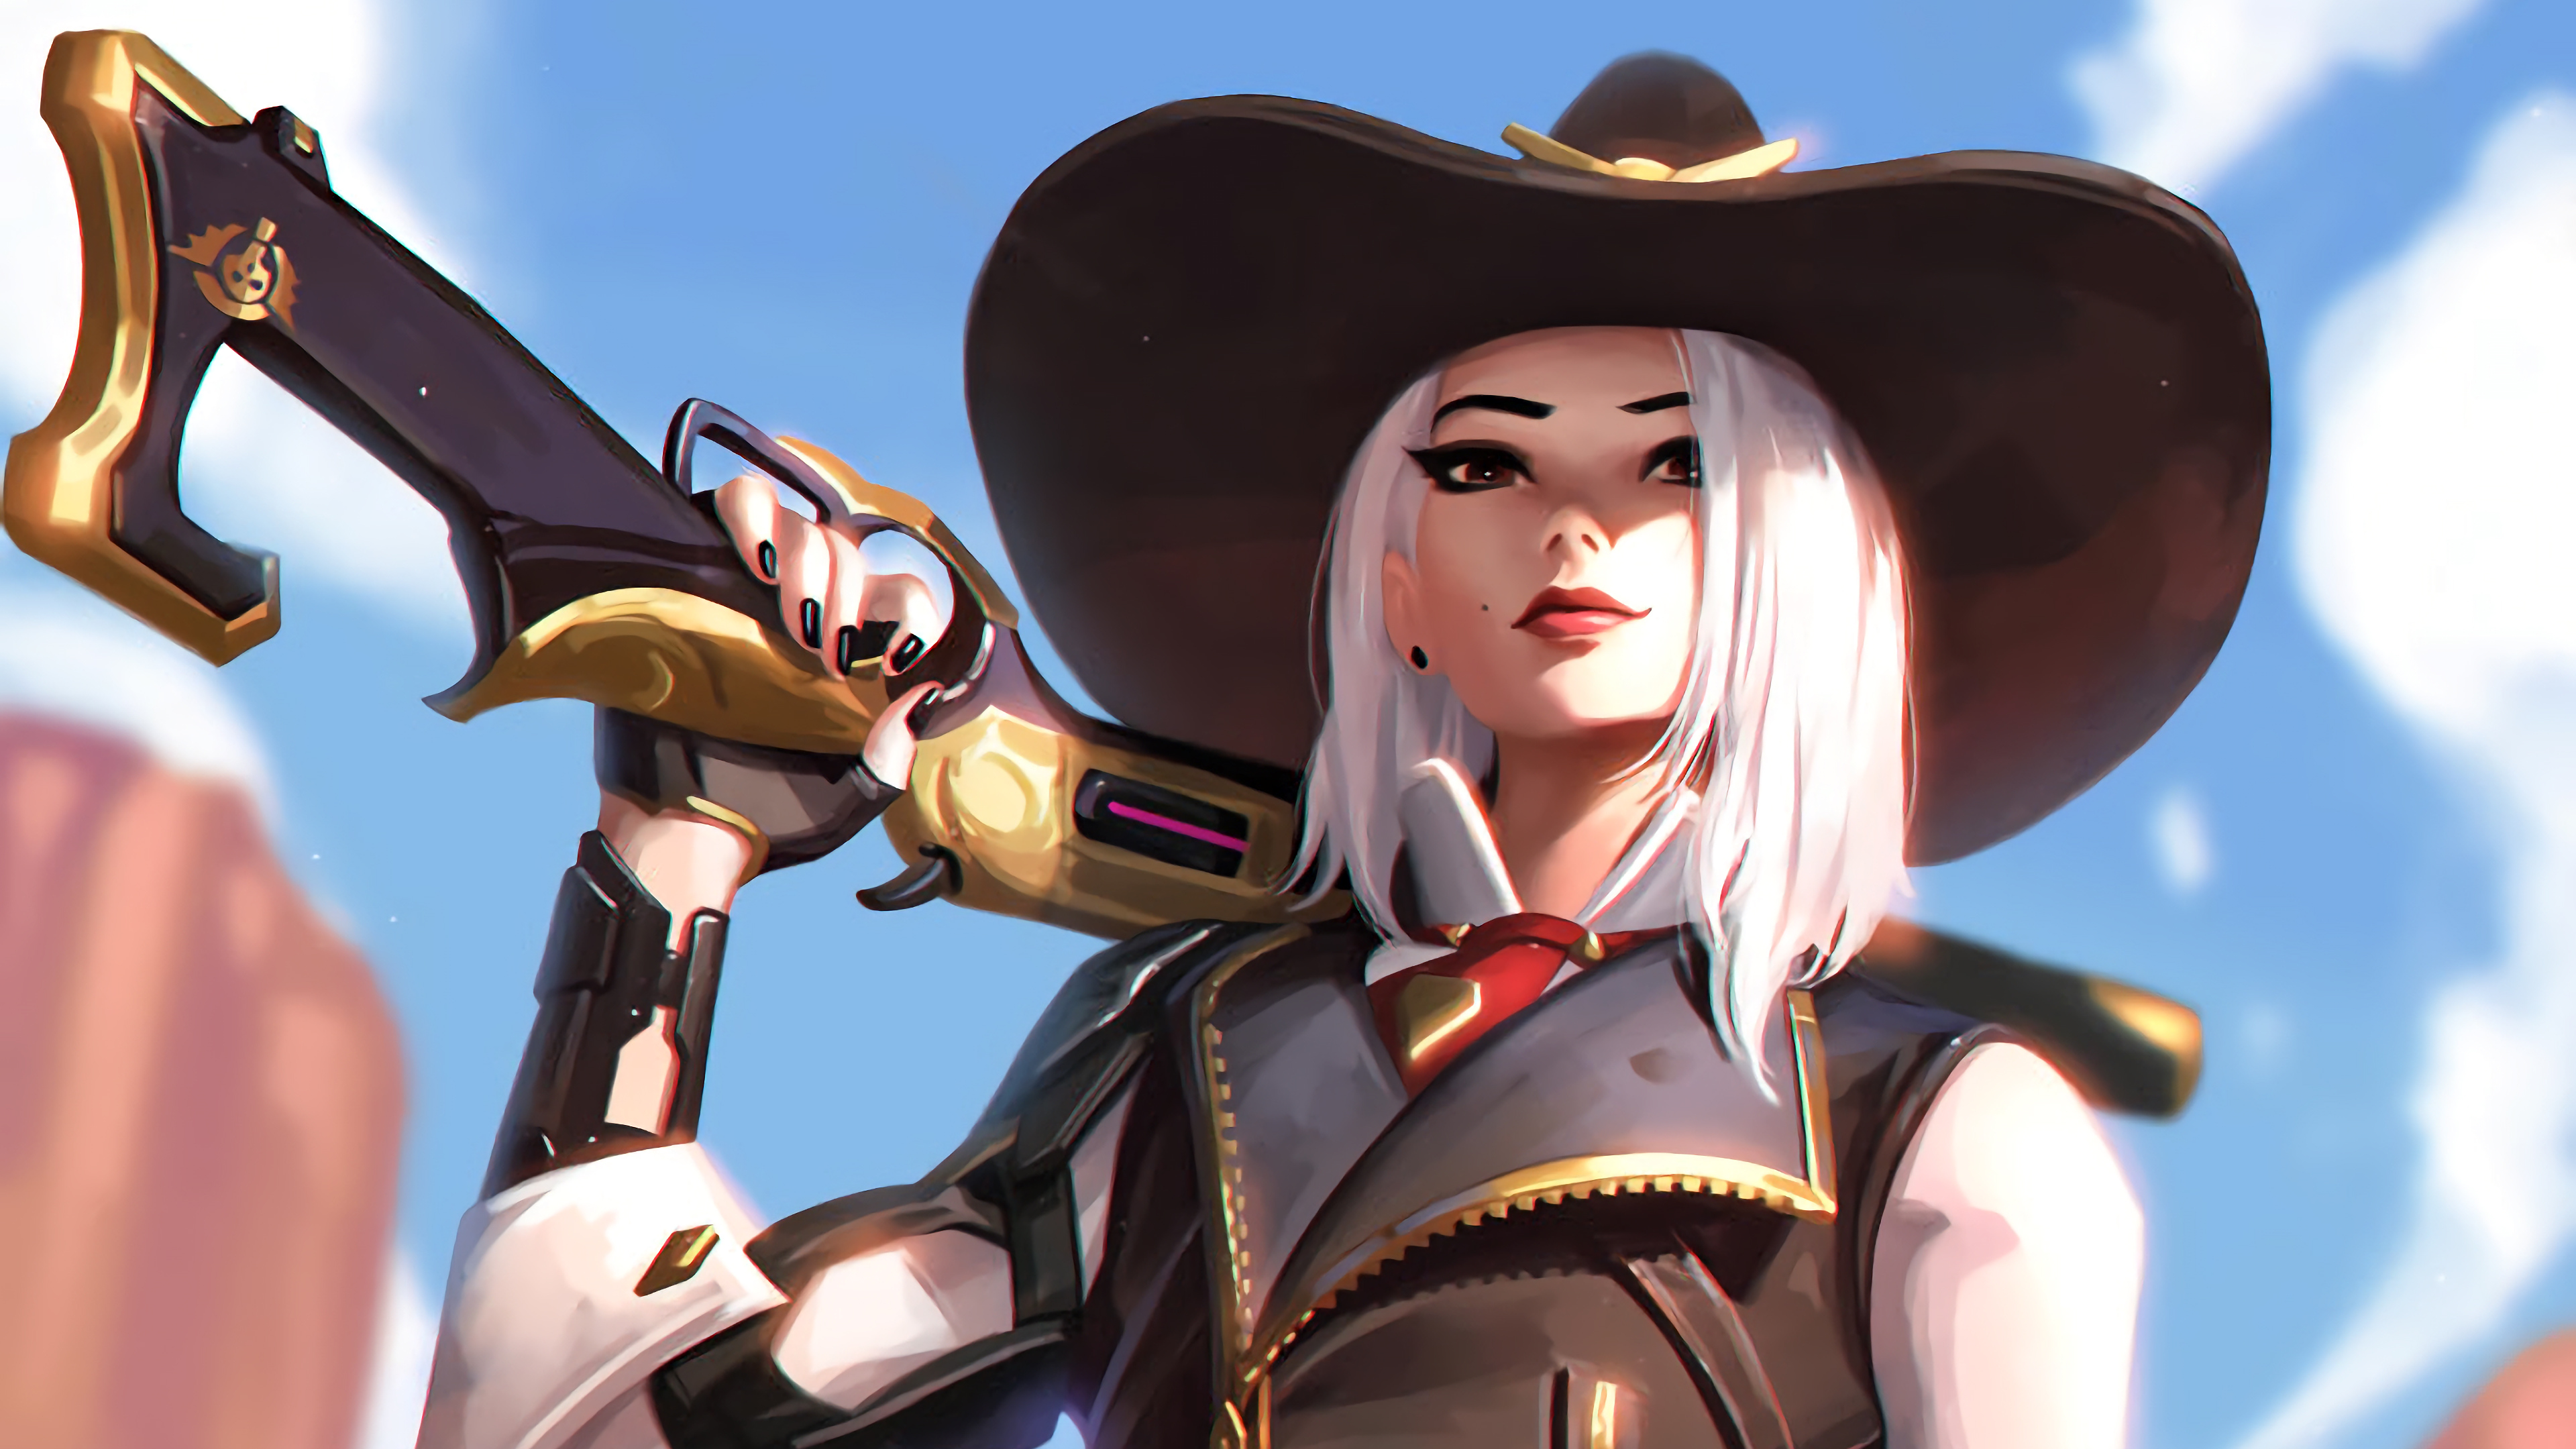 General 3840x2160 digital art video game art video games video game characters video game girls women Overwatch Blizzard Entertainment illustration Ashe (Overwatch) weapon shotgun white hair portrait PC gaming girls with guns cowboy hats hat women with hats black nails painted nails red lipstick